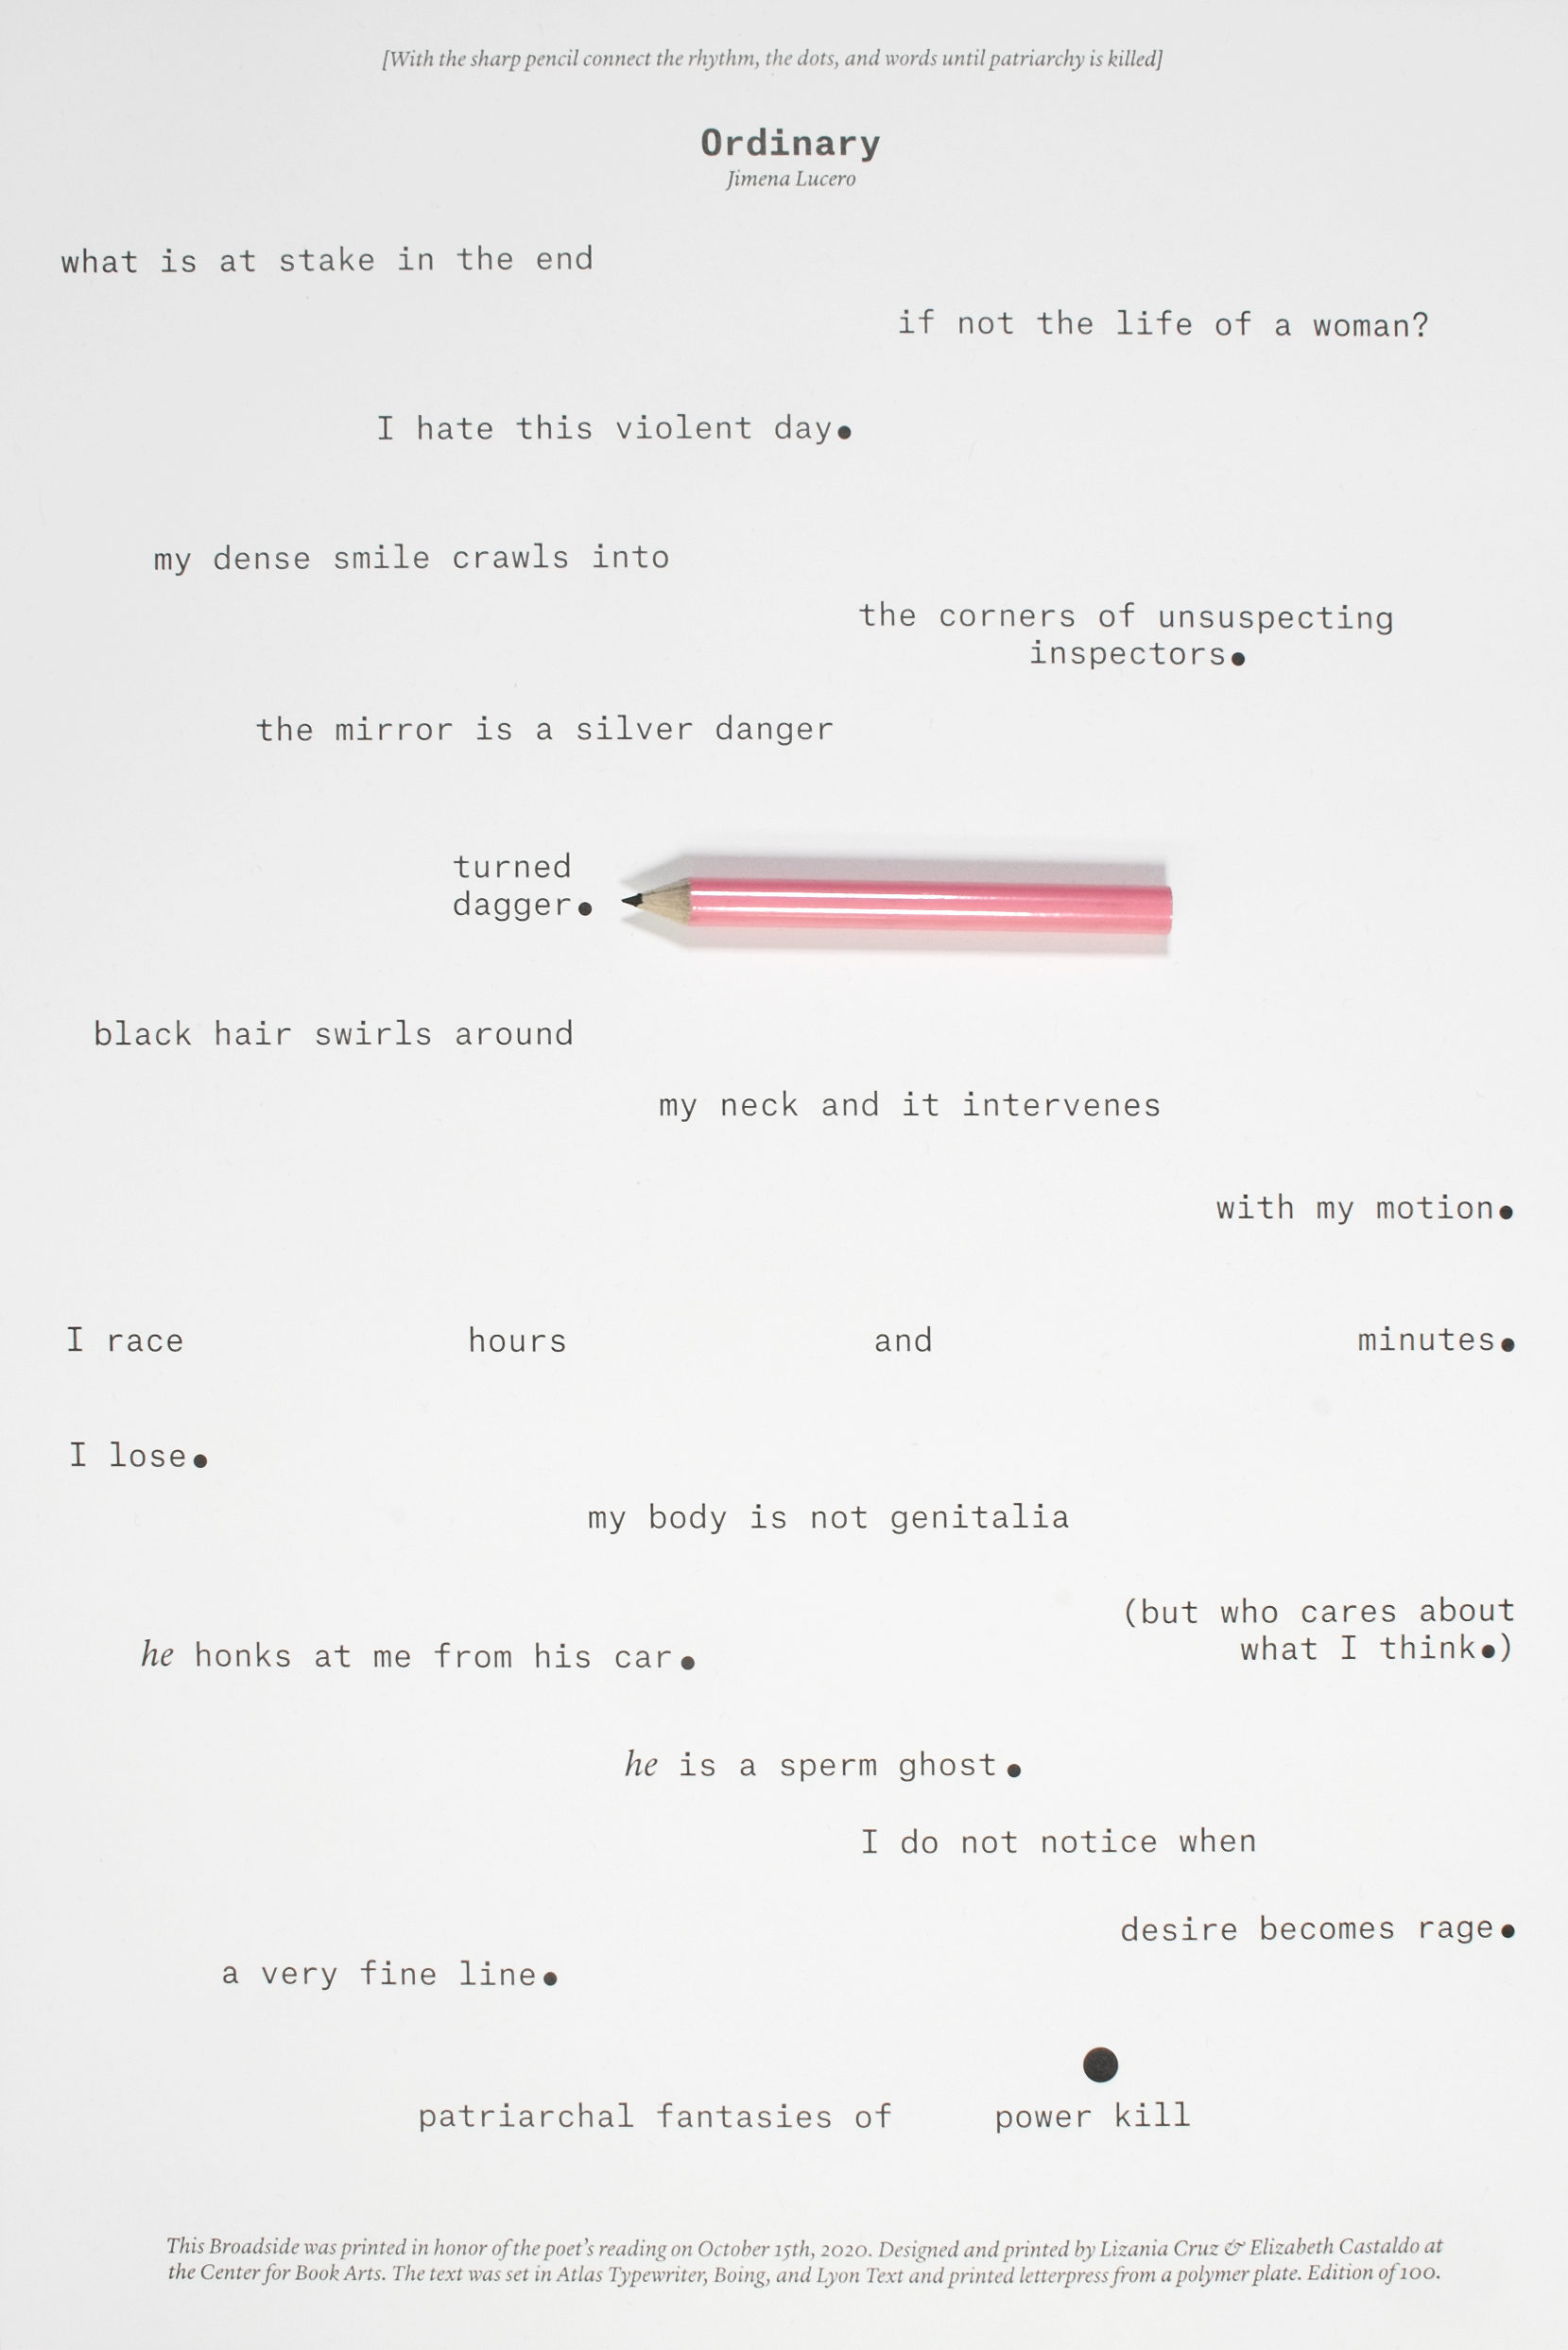 white broadside with poem printed in black ink with a pink golf pencil affixed to the center